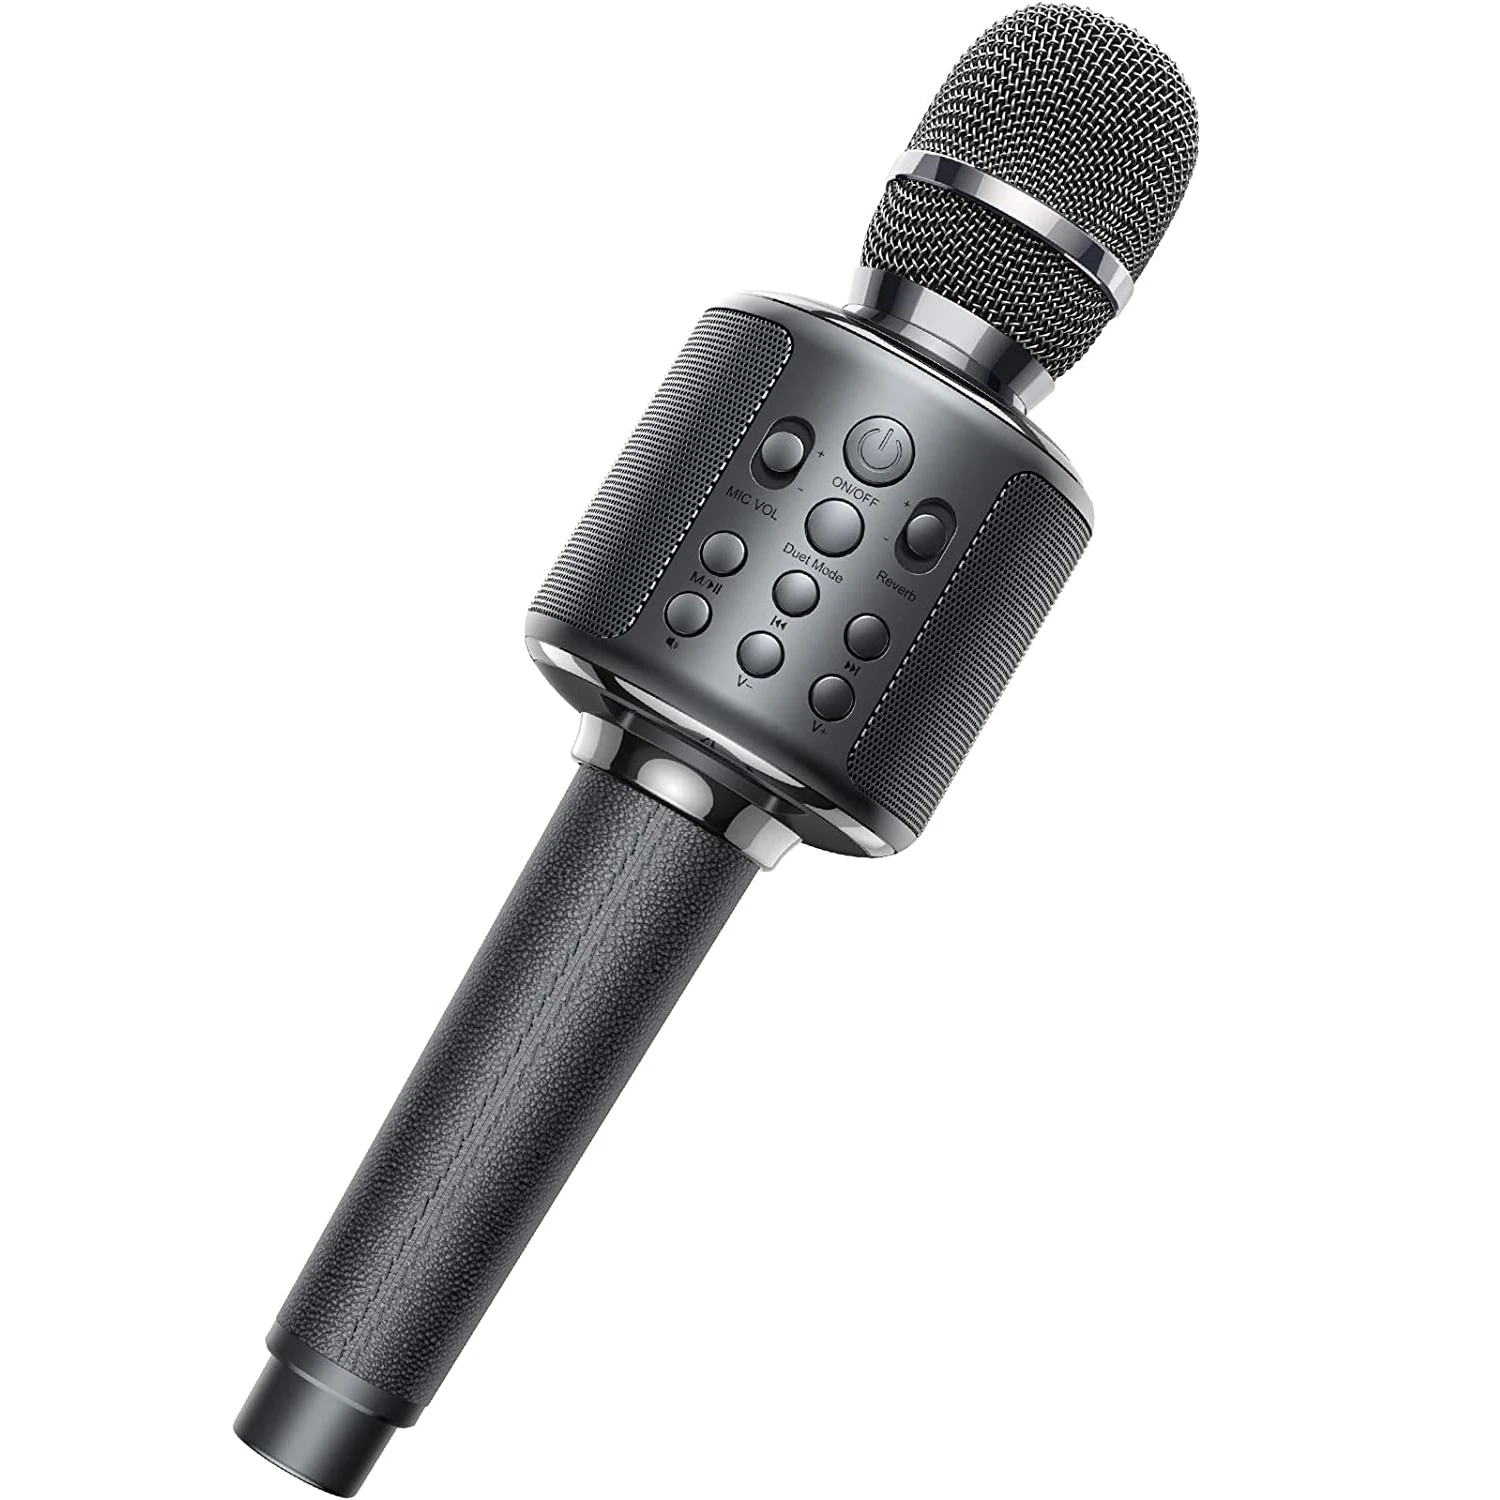 GOODAAA Wireless Karaoke Microphone for Phone Home Singing Portable Mic Speaker Y11S Condenser Microfone Bluetooth-Compatible